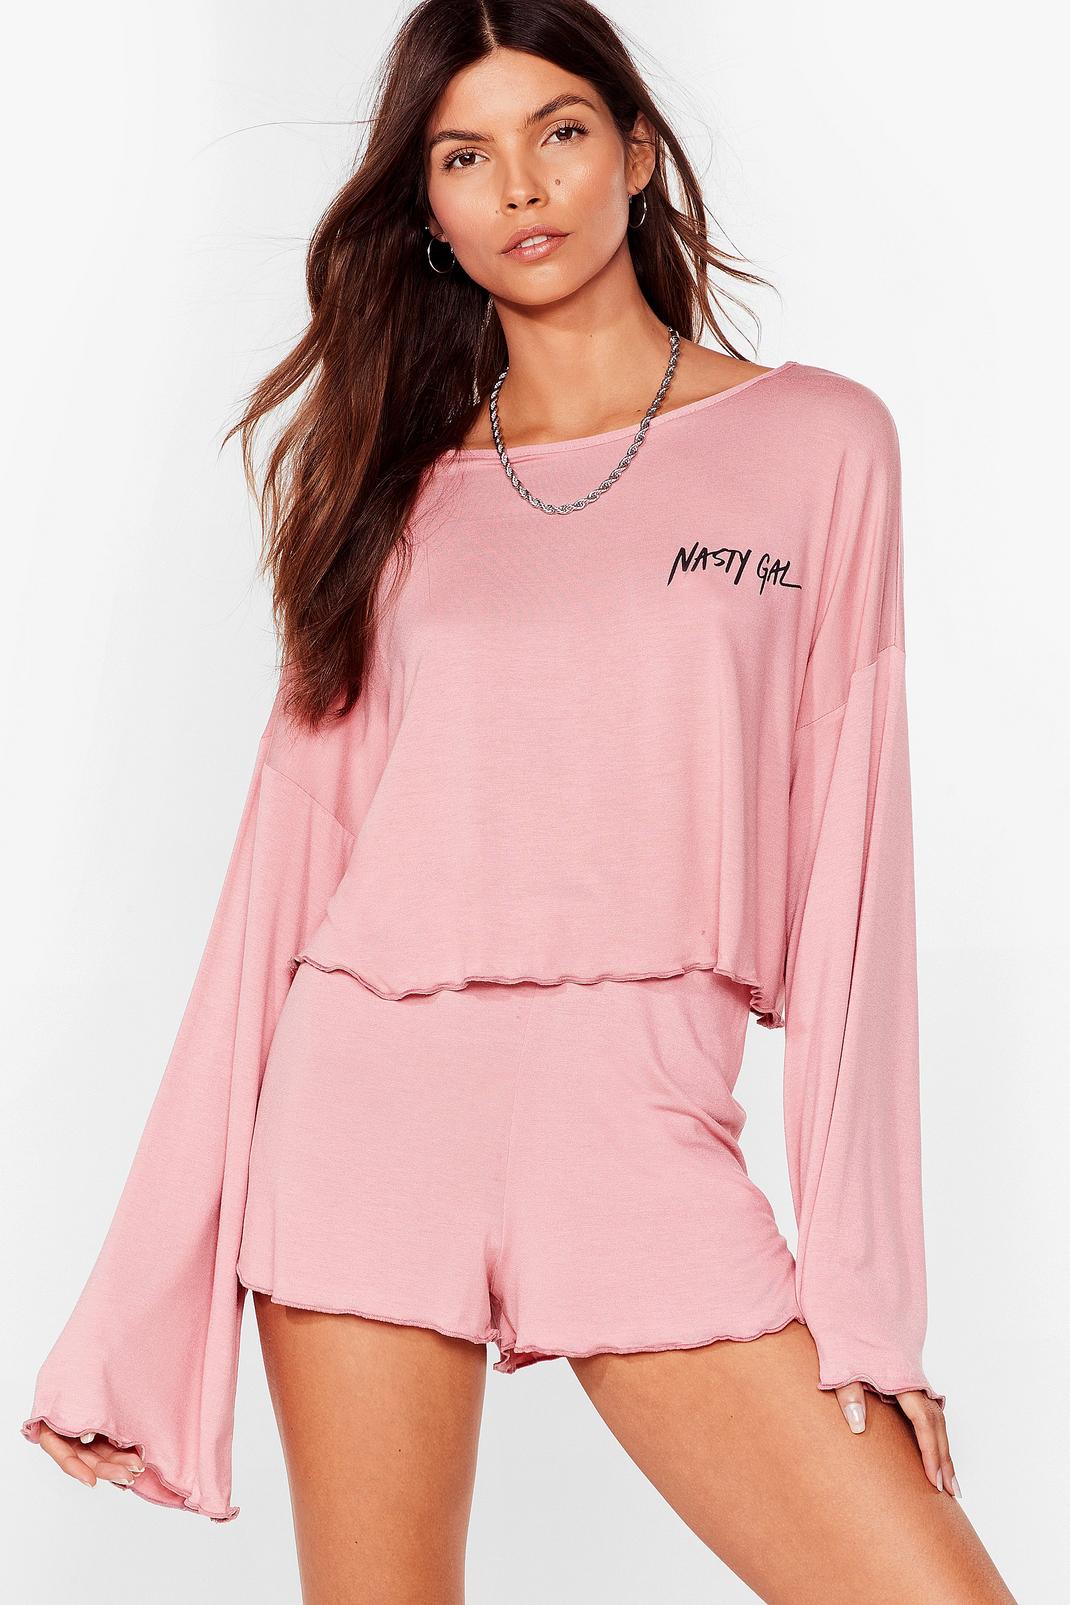 Nude Nasty Gal Top and Shorts Loungewear Set image number 1